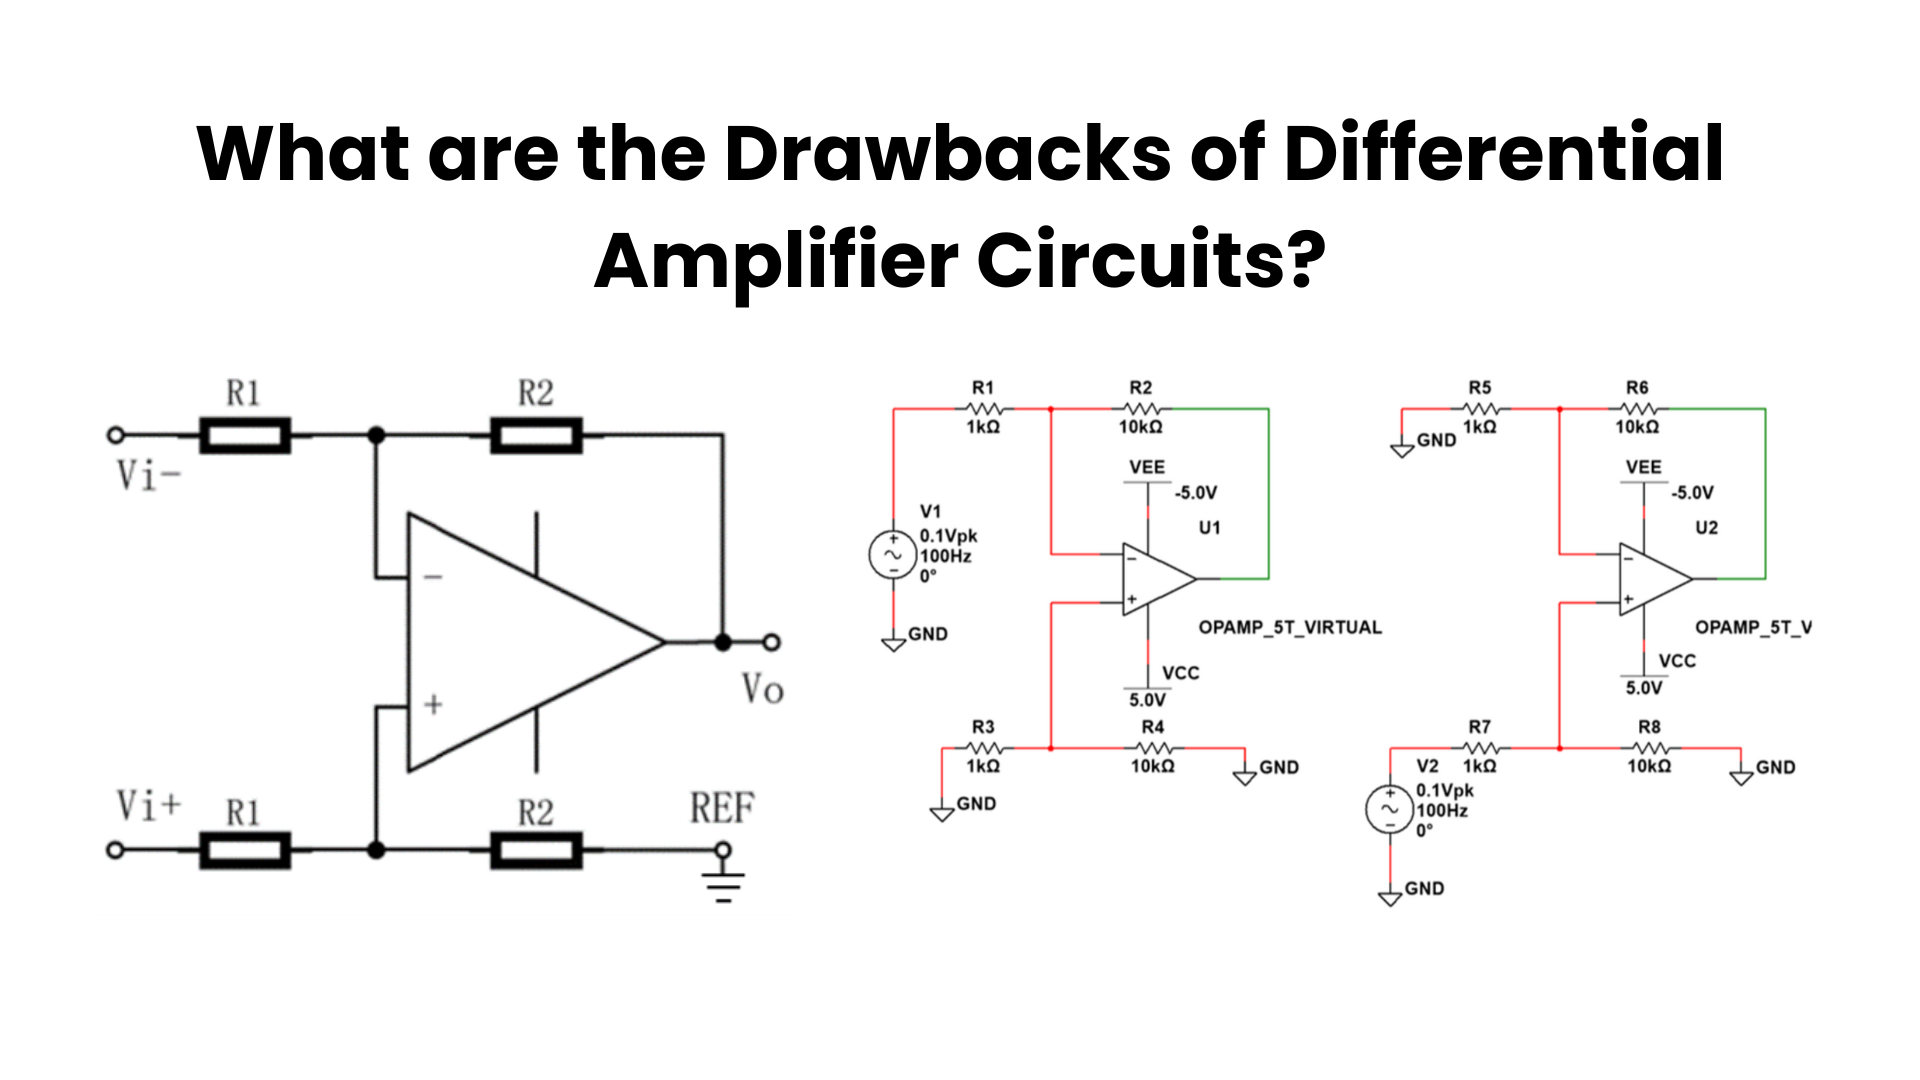 What are the Drawbacks of Differential Amplifier Circuits?